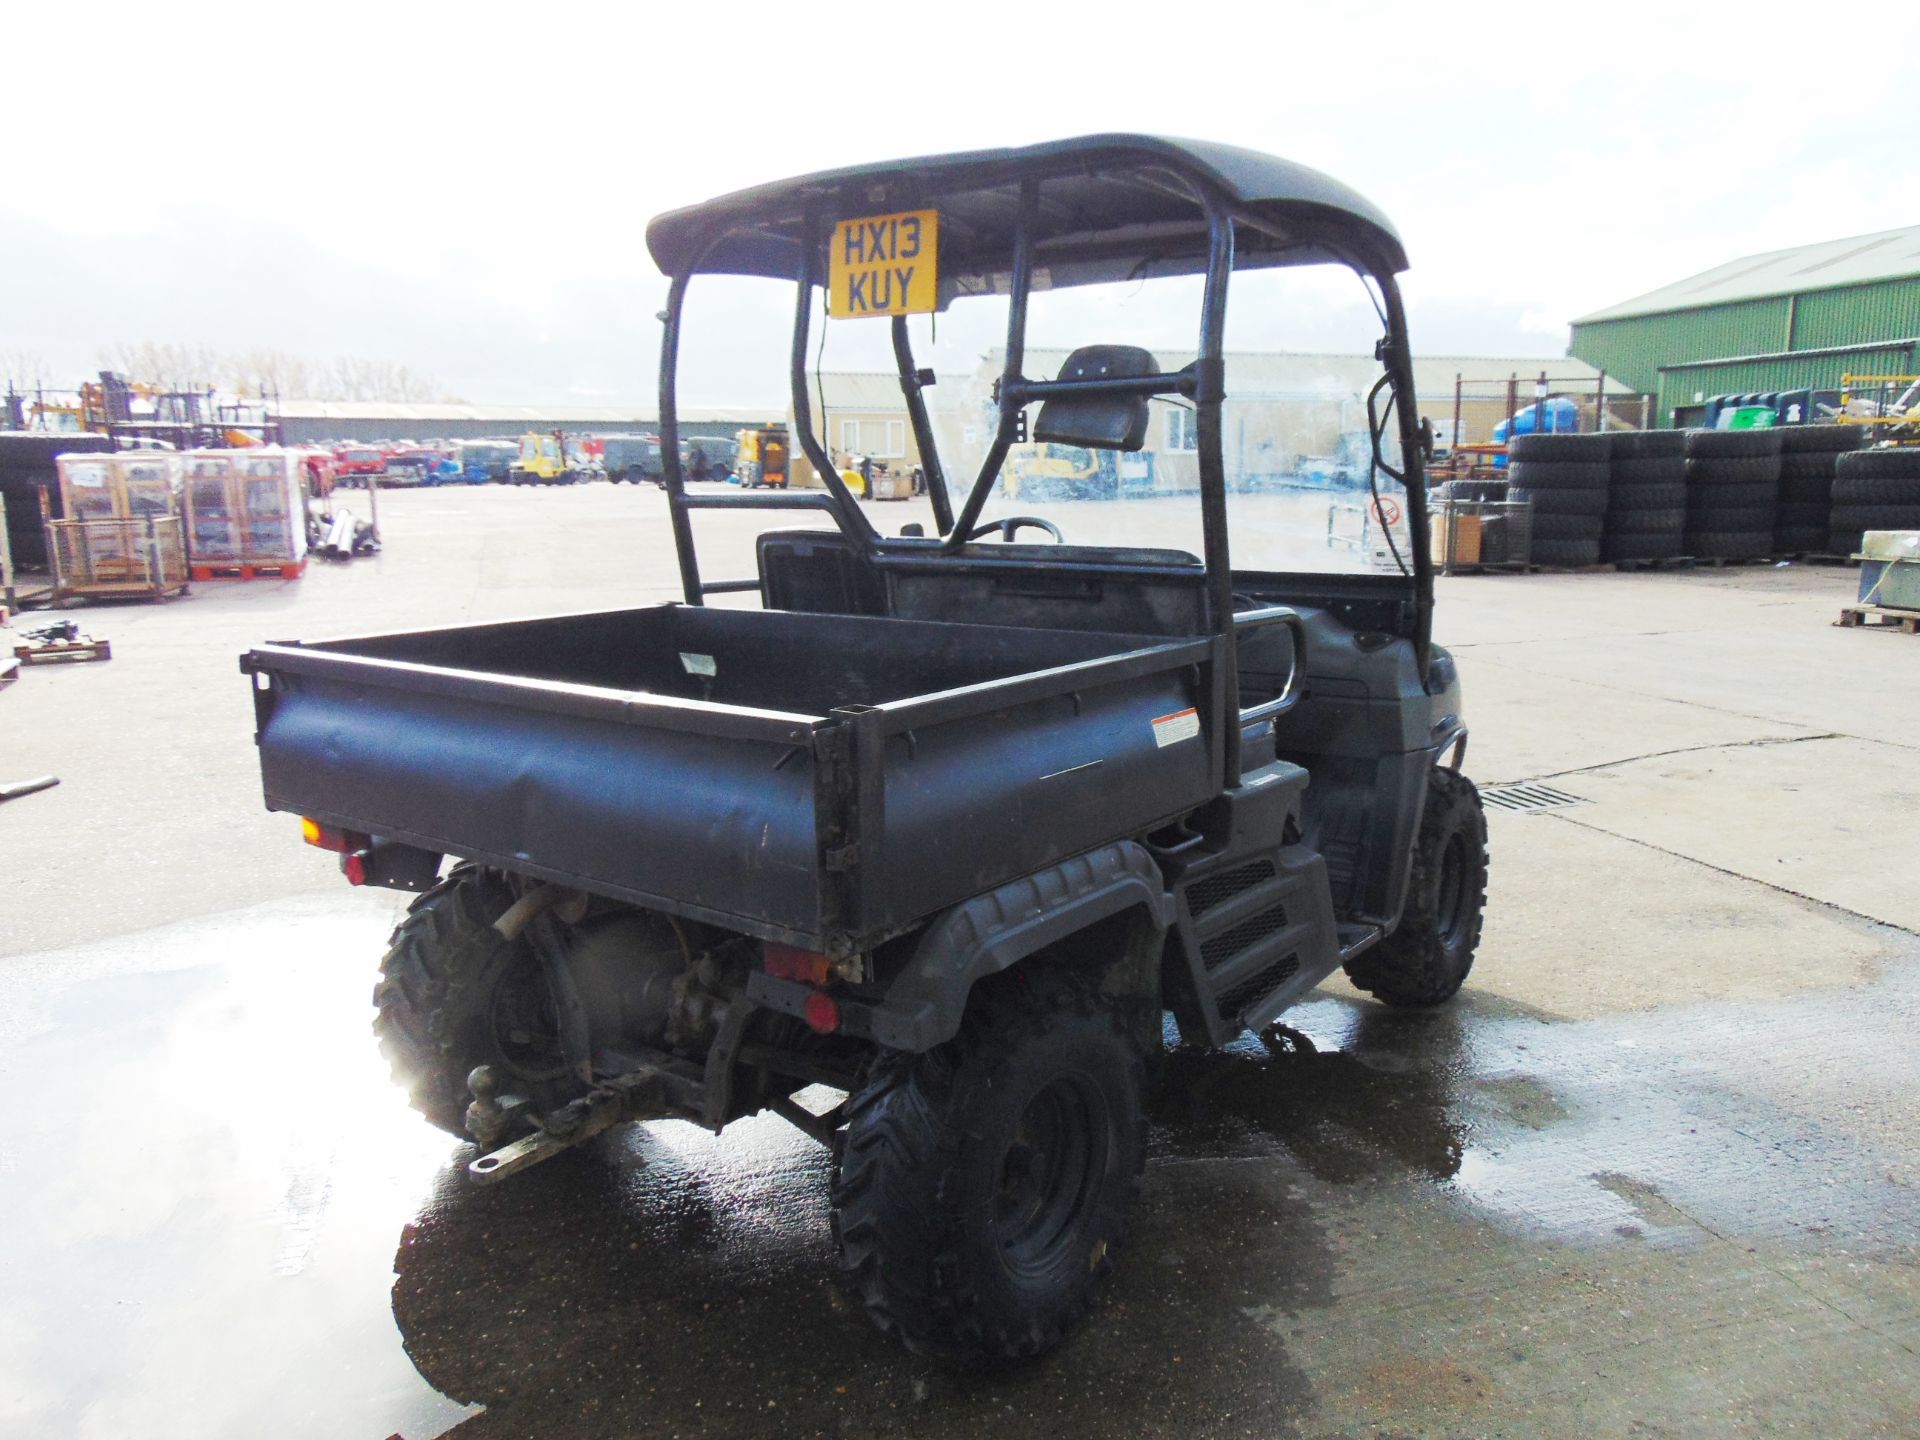 2013 Cushman XD1600 4x4 Diesel Utility Vehicle Showing 217 hrs - Image 8 of 17